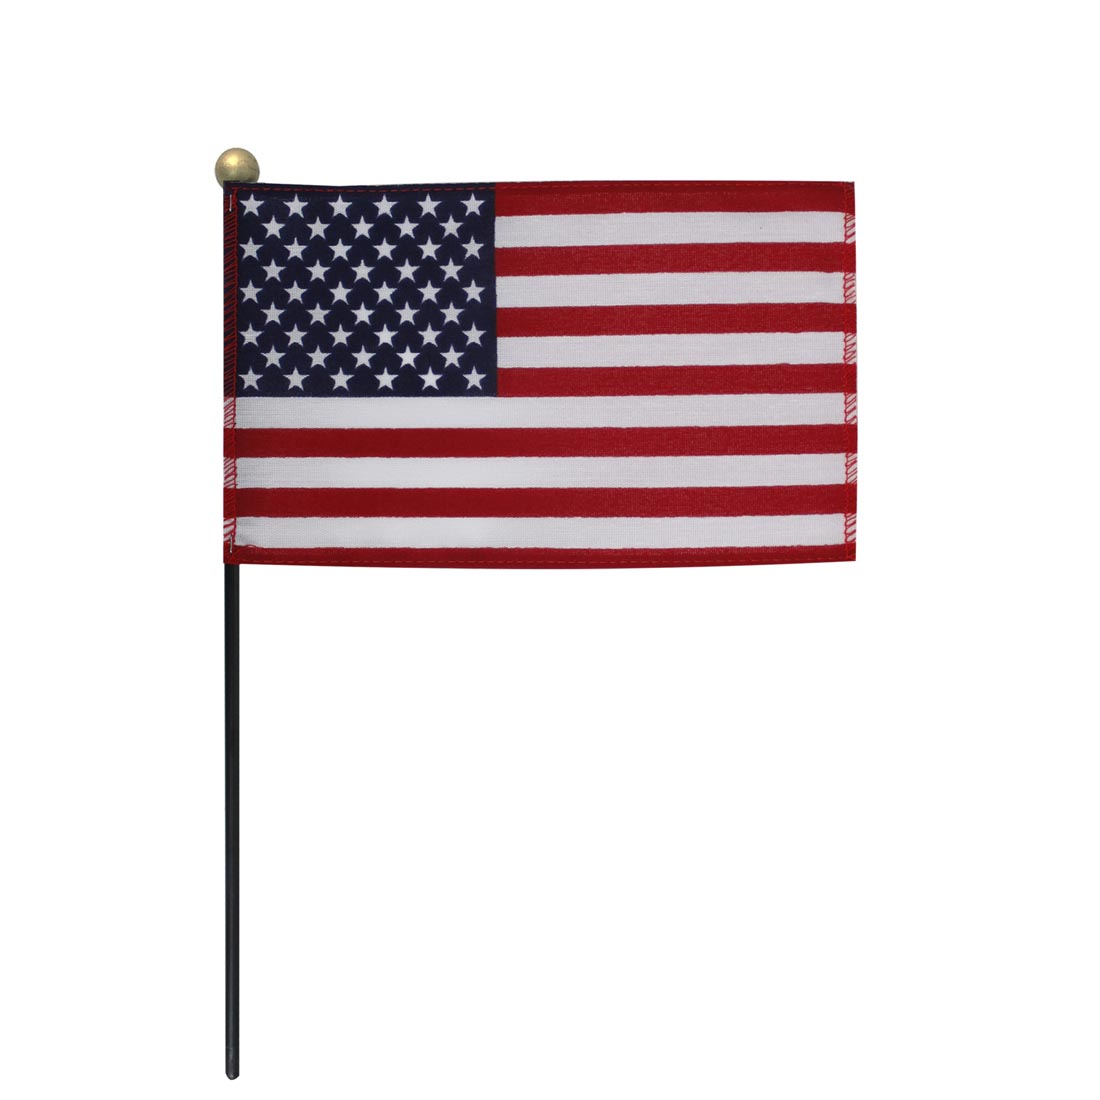 United States of America Flag on a black staff with gold ball